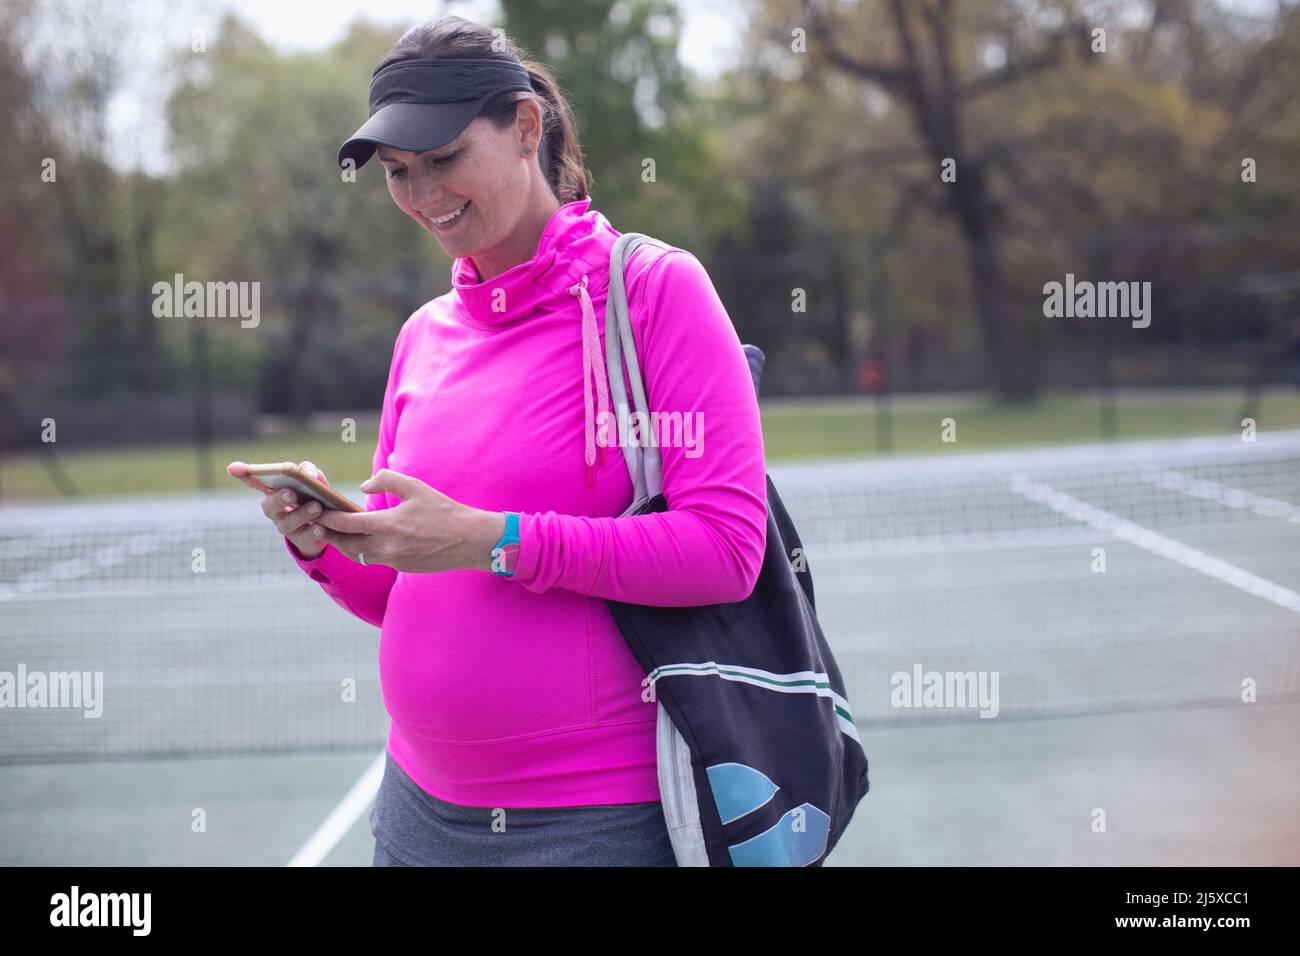 Pregnant woman using smart phone on tennis court Stock Photo